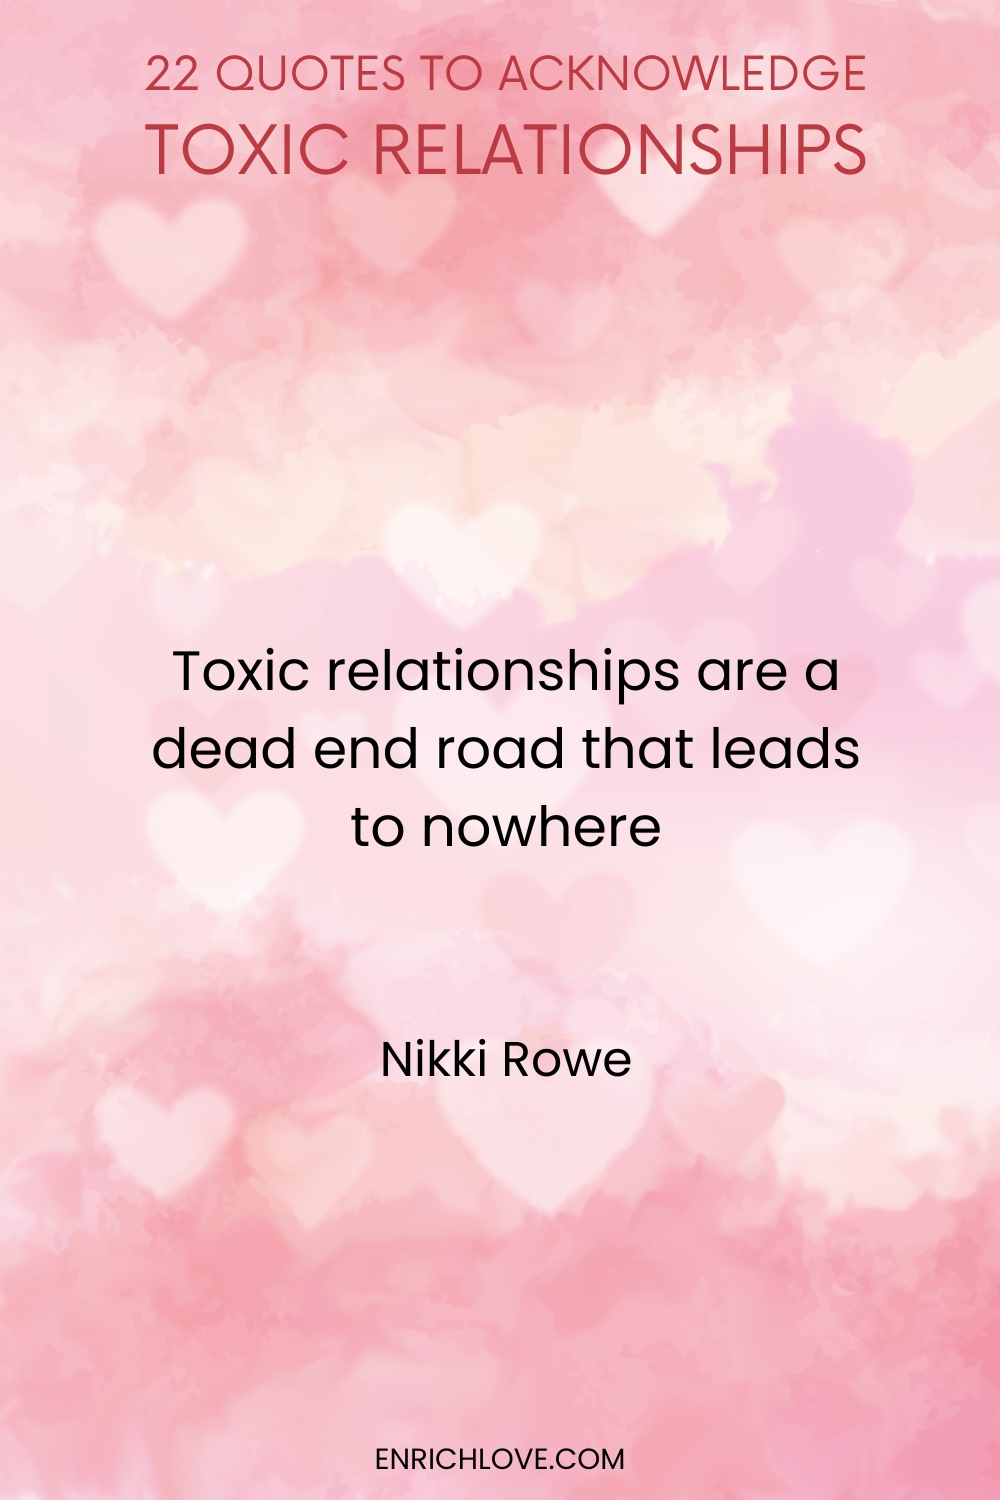 22 Quotes to Acknowledge Toxic Relationships -Toxic relationships are a dead end road that leads to nowhere by Nikki Rowe